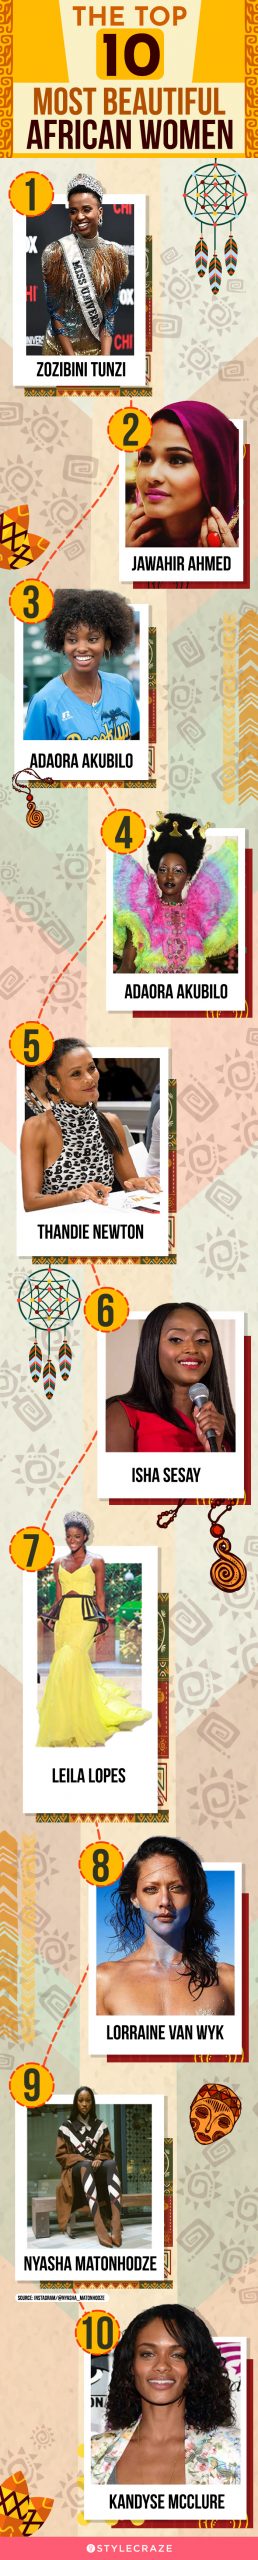 the top 10 most beautiful african women [infographic]